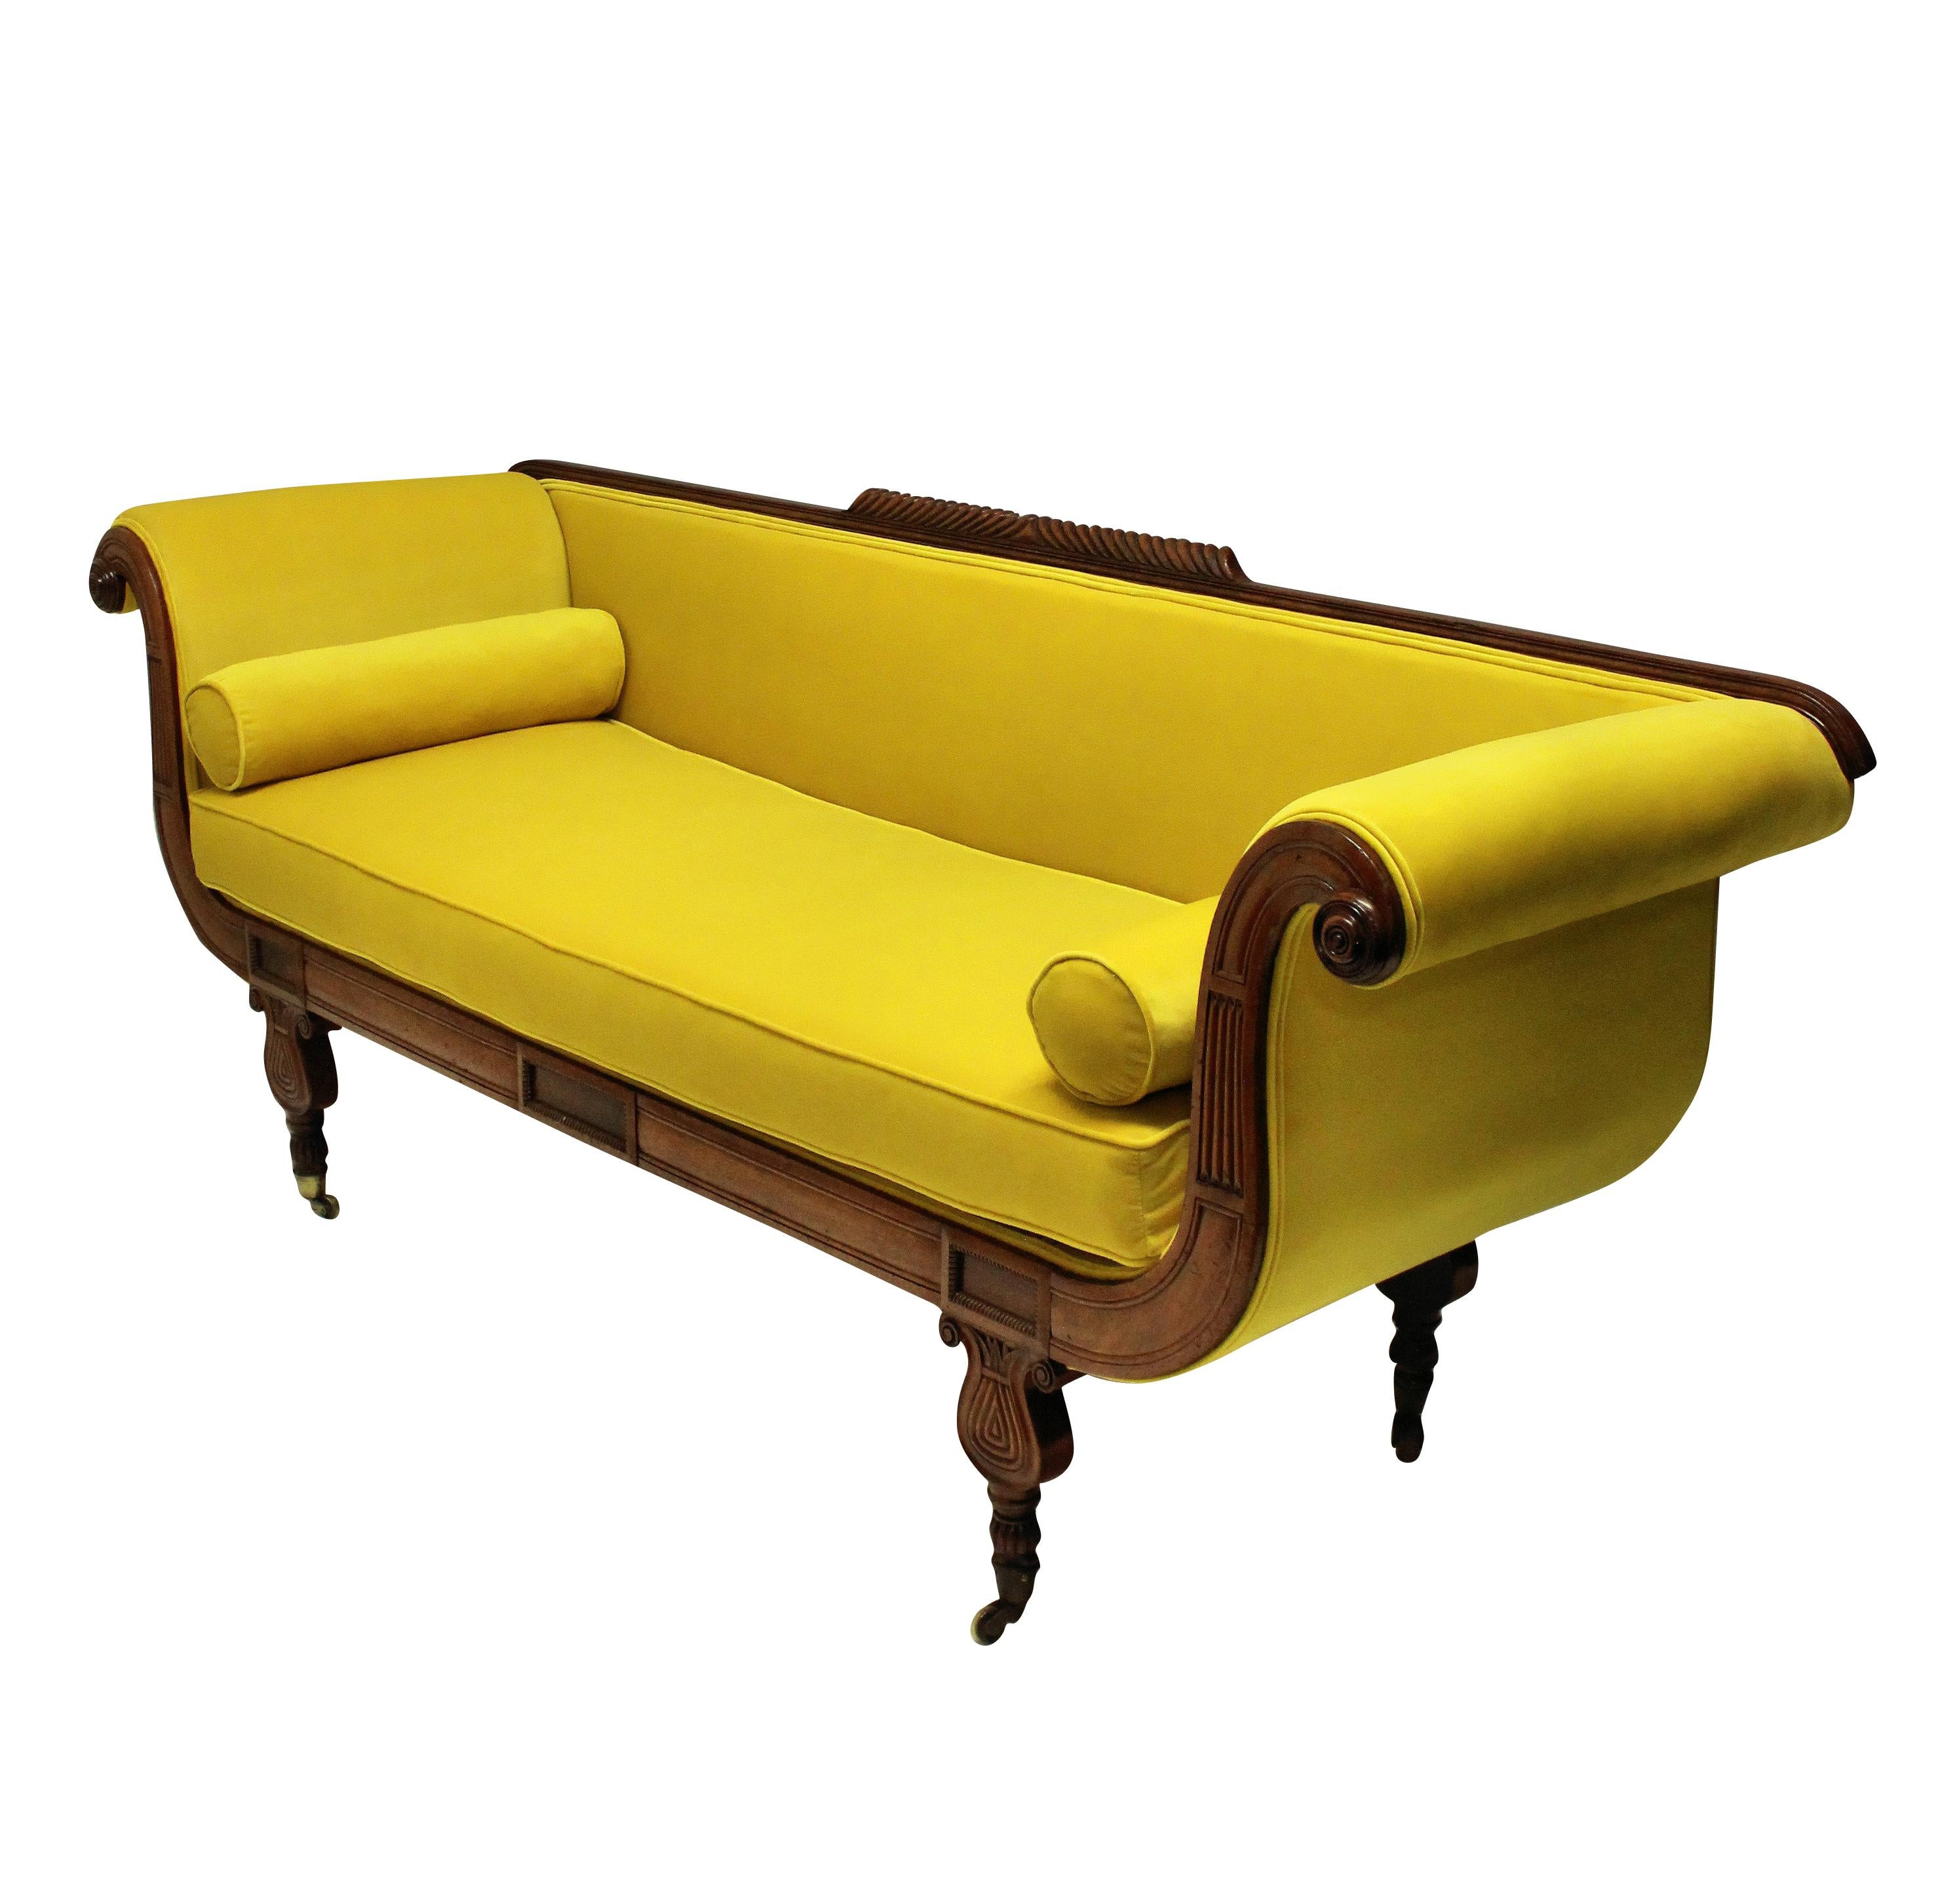 Early 19th Century Regency Daybed in Chartreuse Velvet